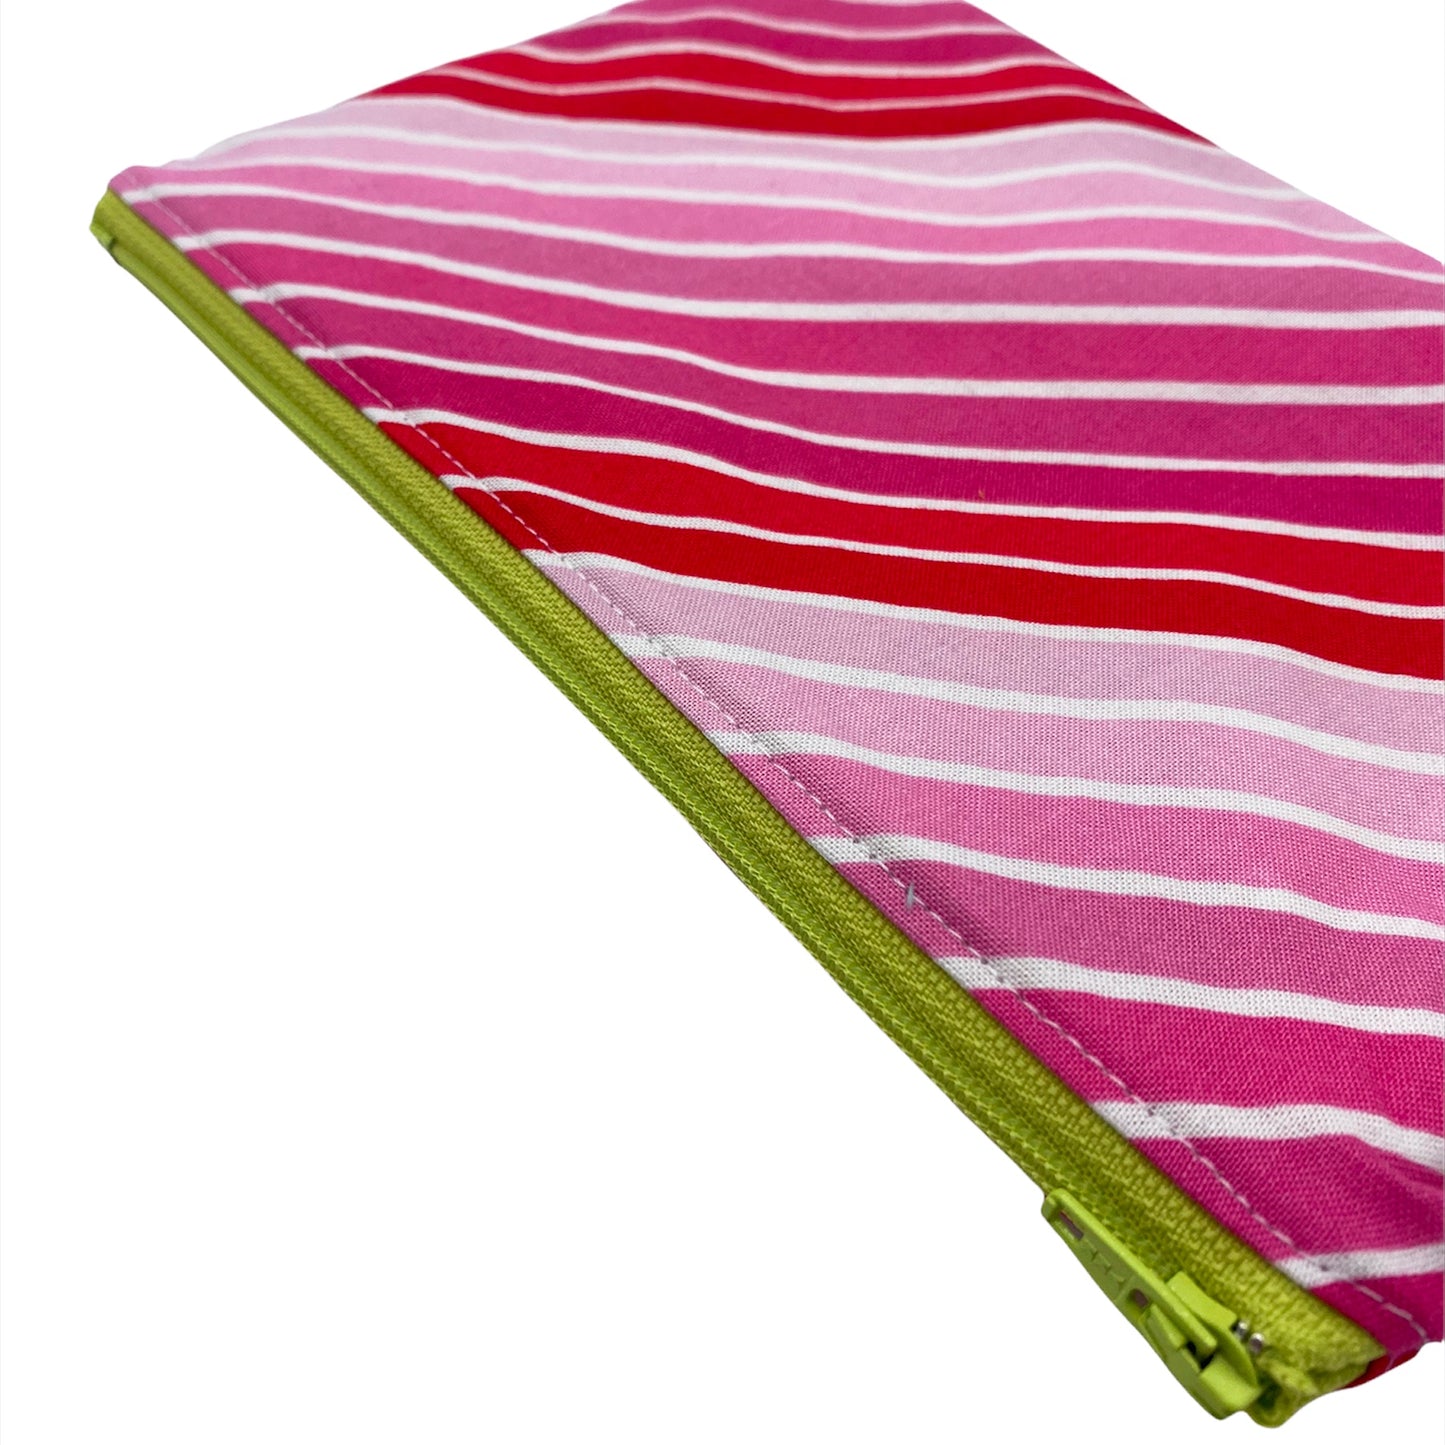 Snack Sized Reusable Zippered Bag Stripes Bias Pink Ombre